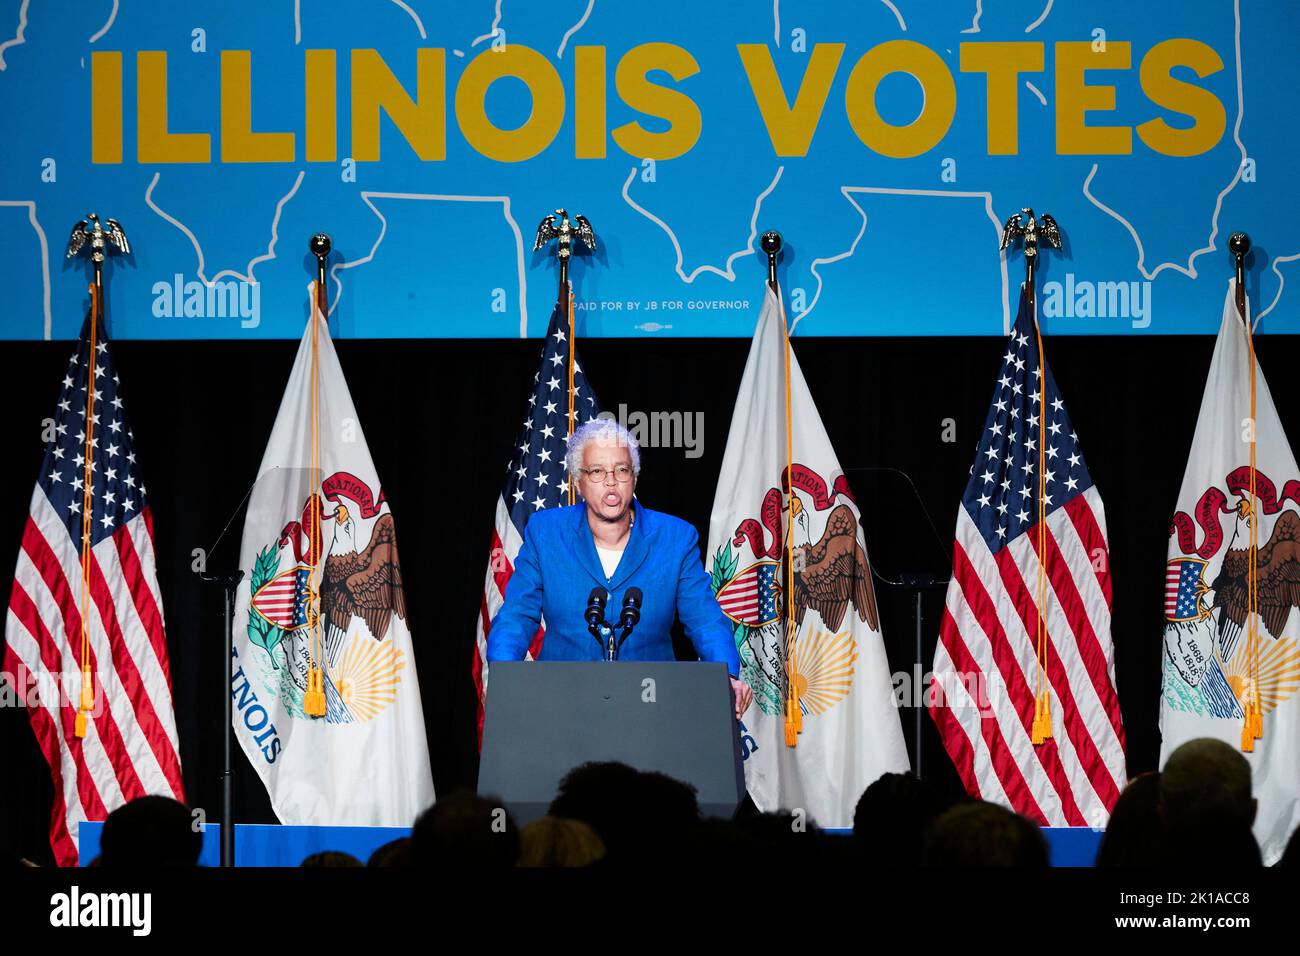 Chicago, USA. 16th Sep, 2022. Toni Preckwinkle, Cook County Commissioner, participates in a political event with Governor JB Pritzker at the University of Illinois, in Chicago, IL, on September 16, 2022. (Photo by Mustafa Hussain/Pool/ABACAPRESS.COM) Credit: Abaca Press/Alamy Live News Stock Photo